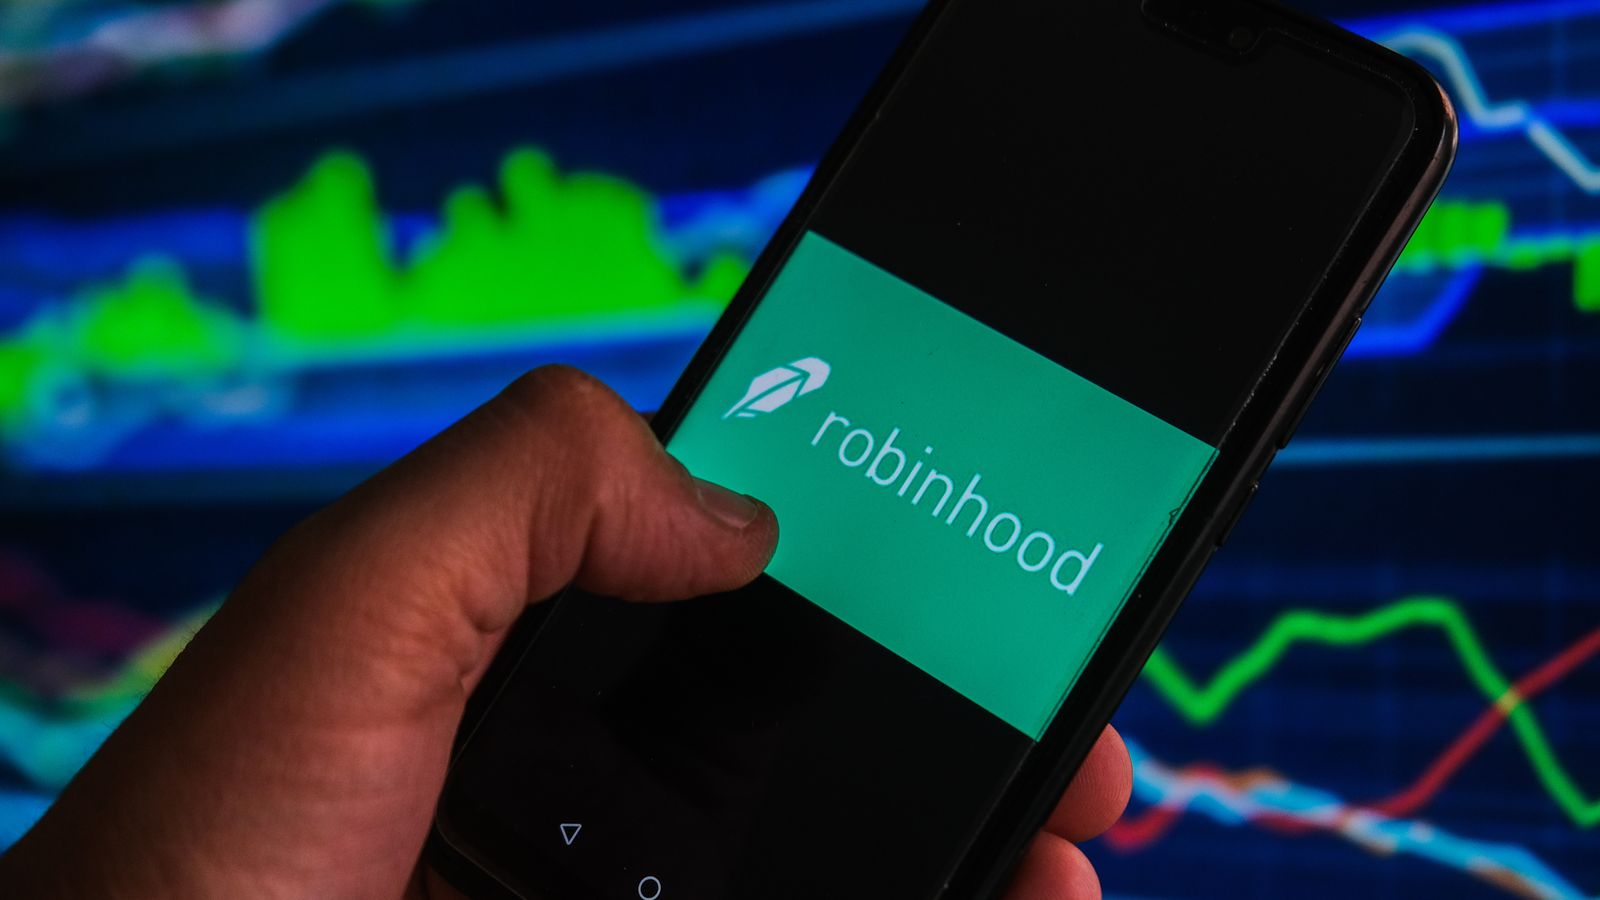 Robinhood's payment for order flow won't be challenged by the SEC